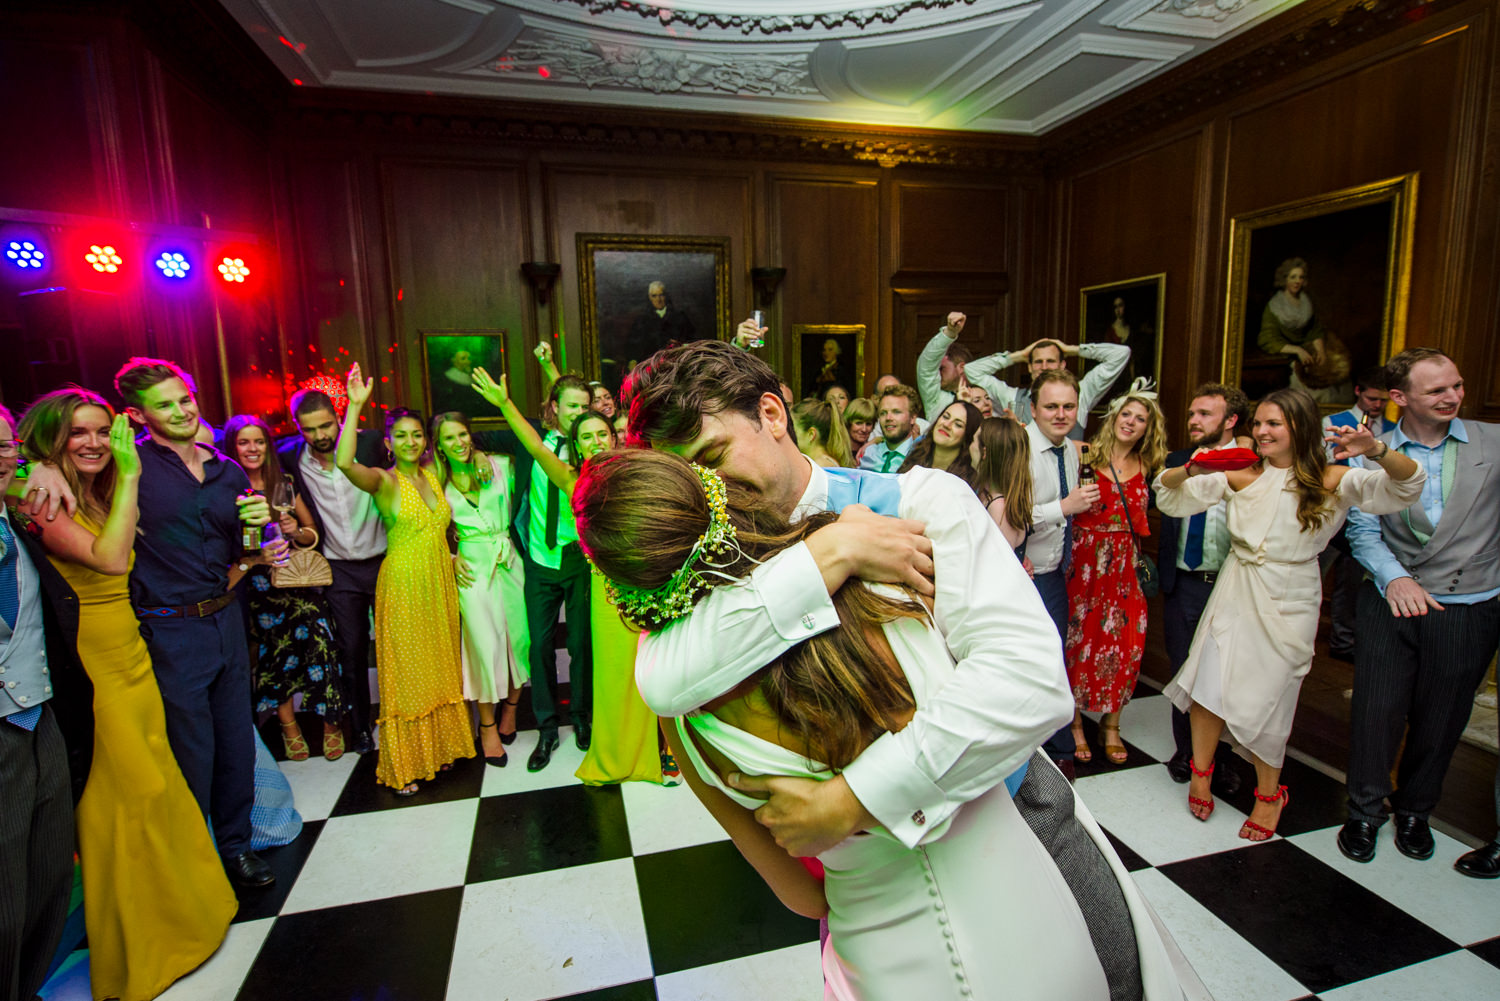 Wedding party dancing at Cowdray House